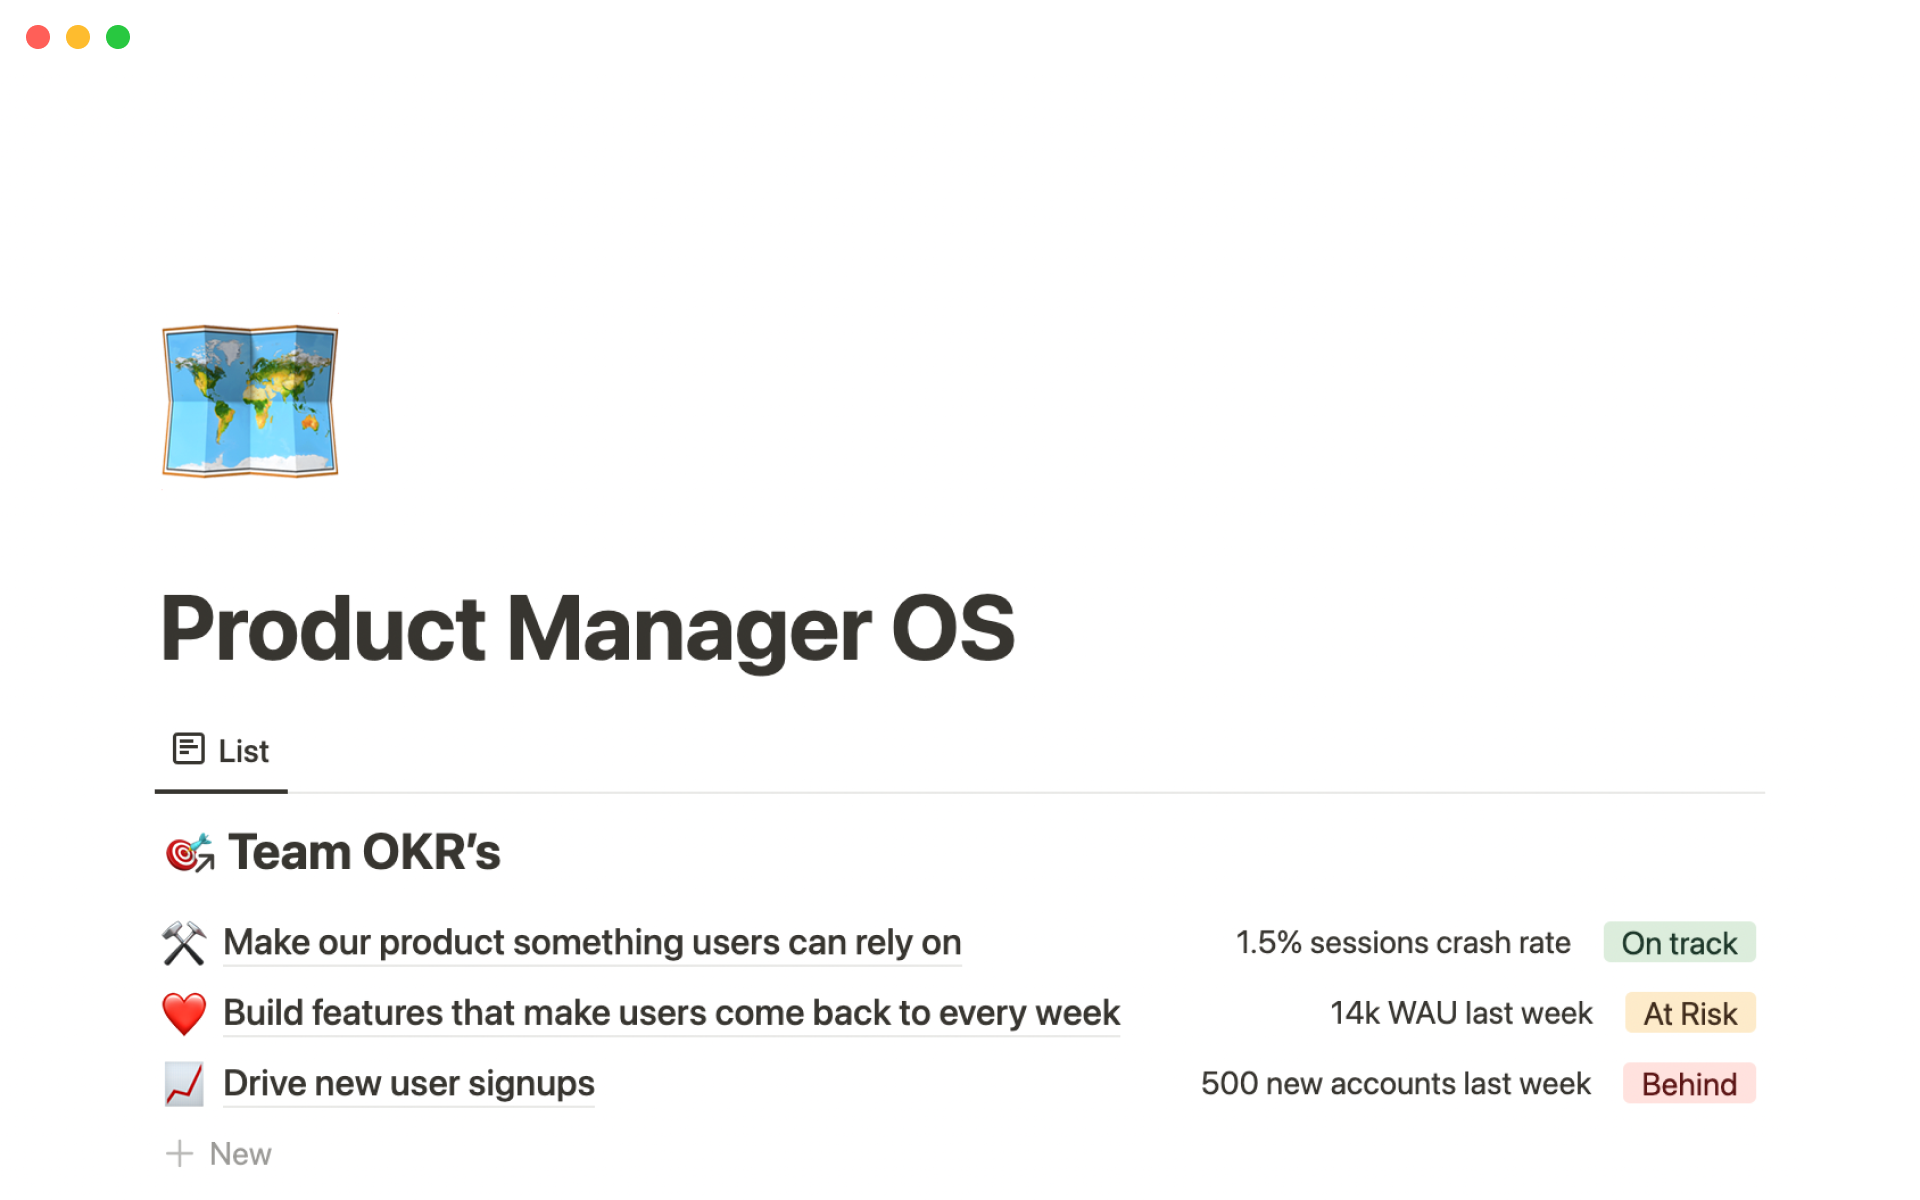 Helps product managers manage their time and teams with more purpose and focus.